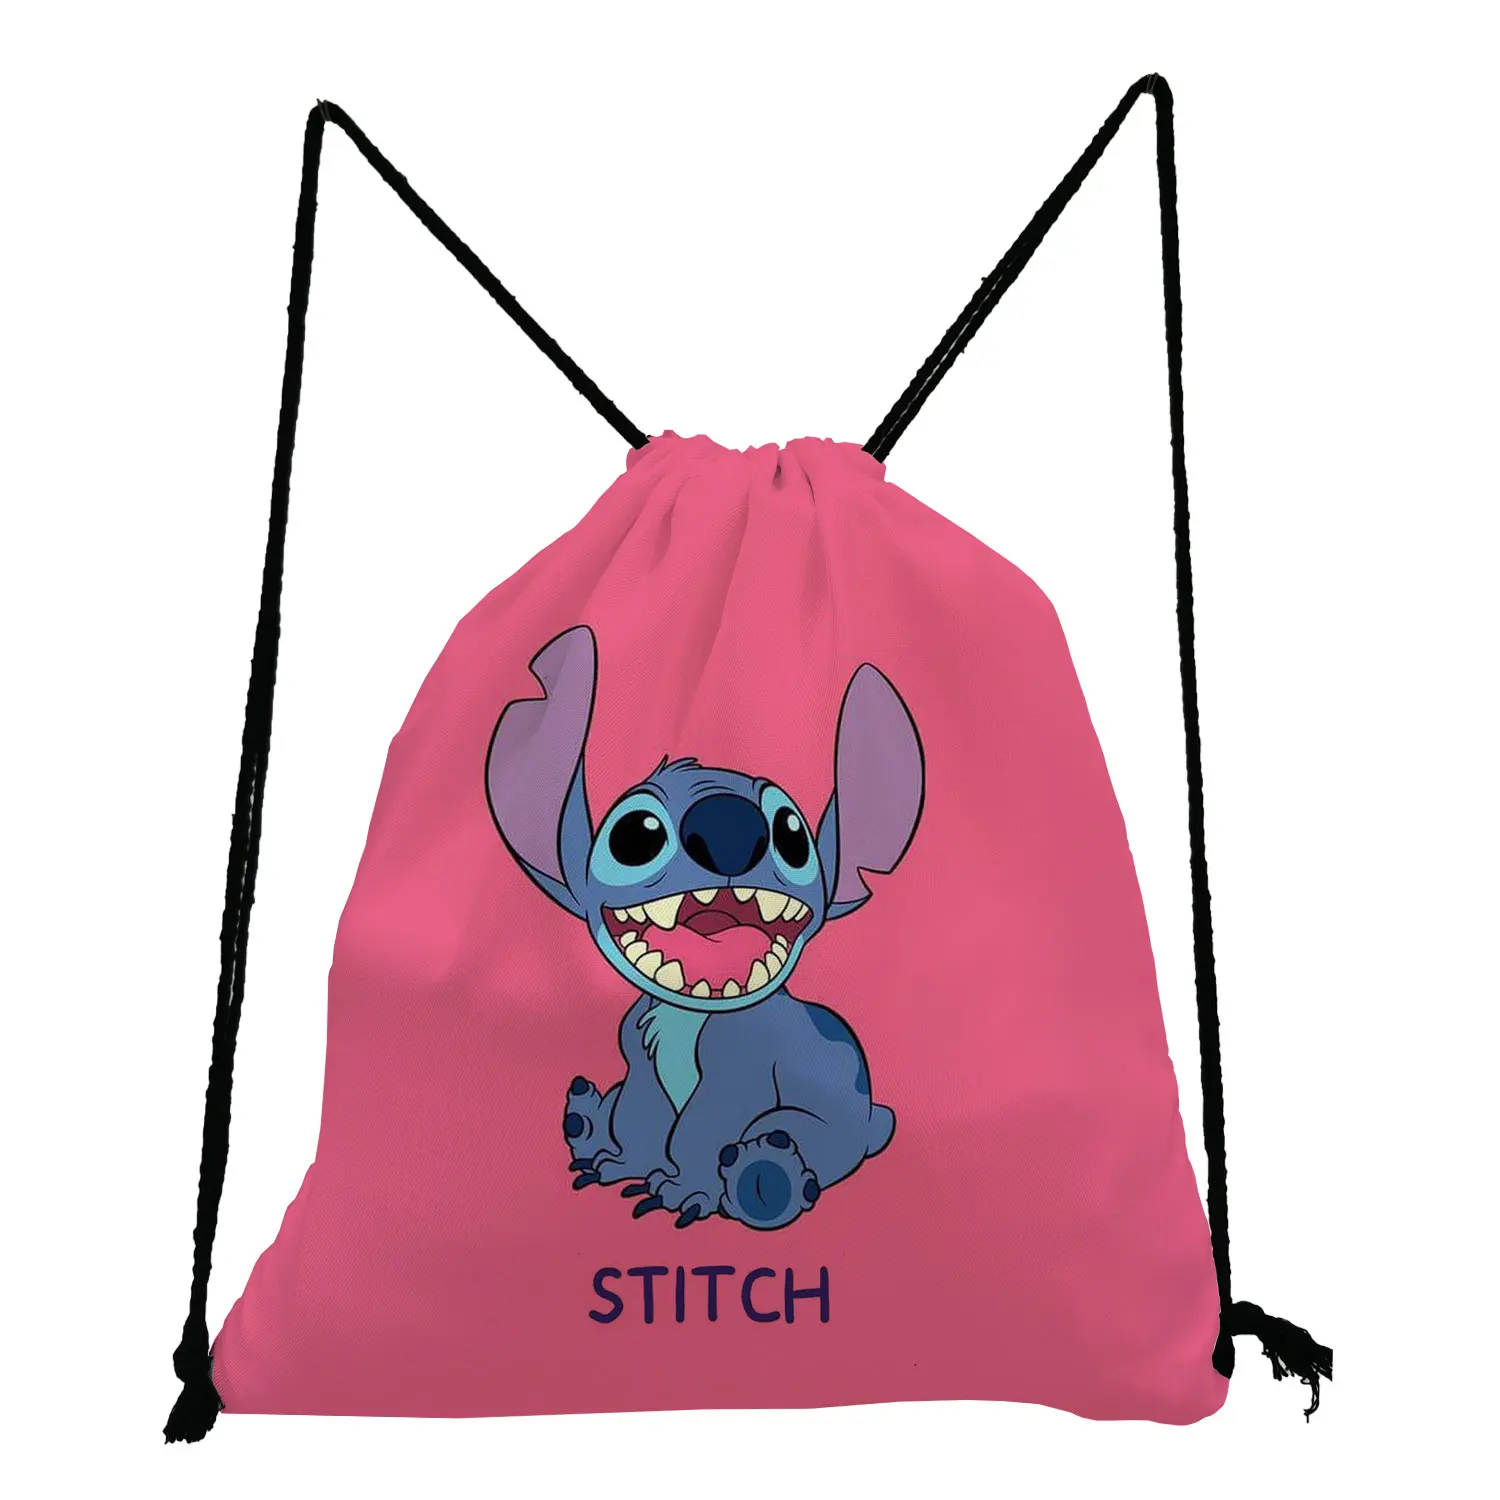 

Disney Lilo Stitch Drawstring Bags Cartoon Child Small Backpack Eco Reusable Travel Storage Bag New Trend Swim Backpack Foldable